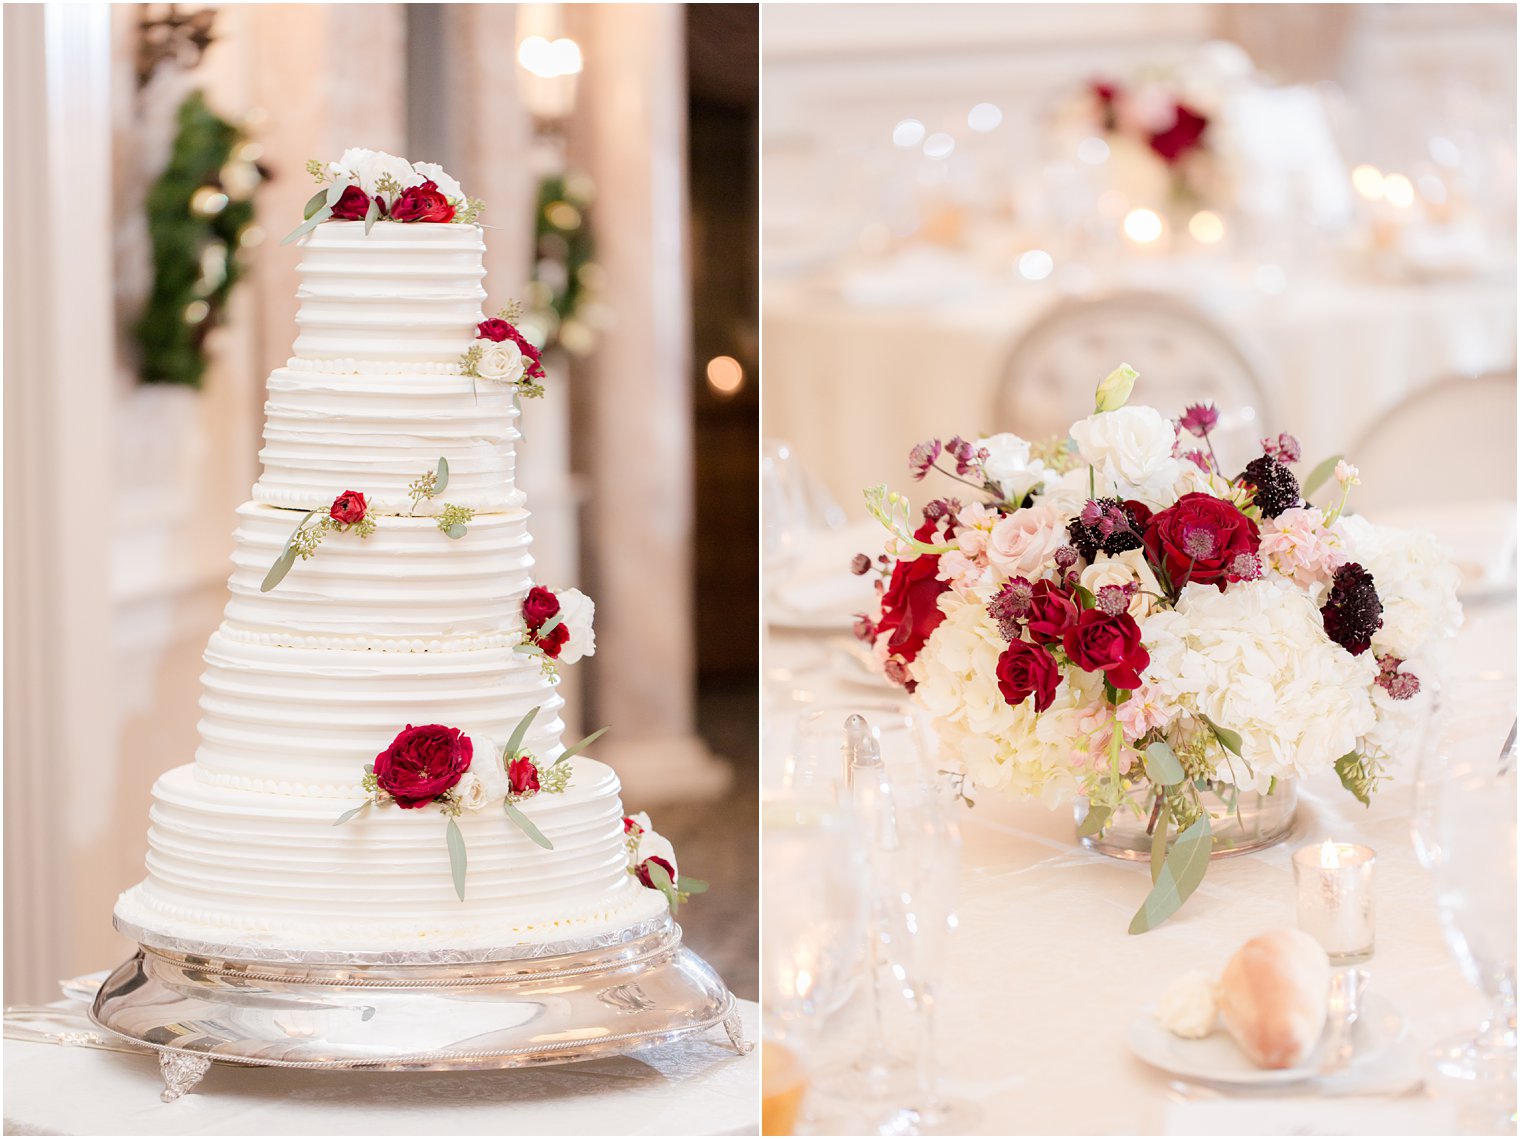 cake and centerpieces for a holiday wedding